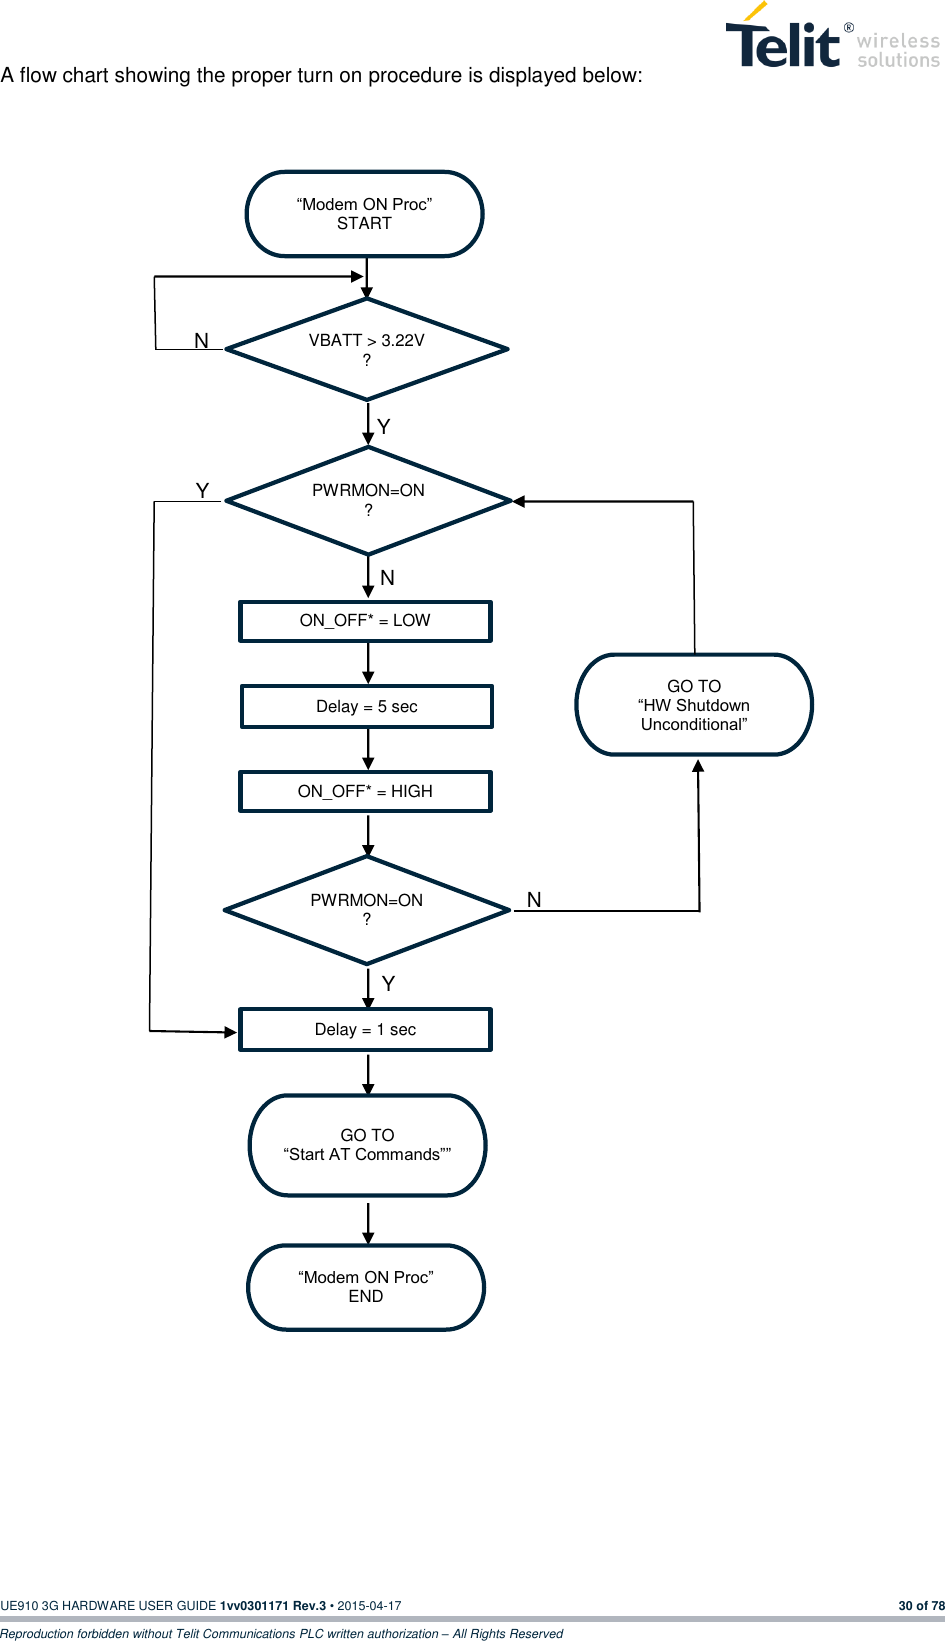  UE910 3G HARDWARE USER GUIDE 1vv0301171 Rev.3 • 2015-04-17 30 of 78 Reproduction forbidden without Telit Communications PLC written authorization – All Rights Reserved A flow chart showing the proper turn on procedure is displayed below:                                           “Modem ON Proc” START VBATT &gt; 3.22V ? ON_OFF* = LOW PWRMON=ON ? Delay = 5 sec ON_OFF* = HIGH GO TO “HW Shutdown Unconditional” PWRMON=ON ? Delay = 1 sec GO TO “Start AT Commands”” “Modem ON Proc” END N N Y Y Y N 